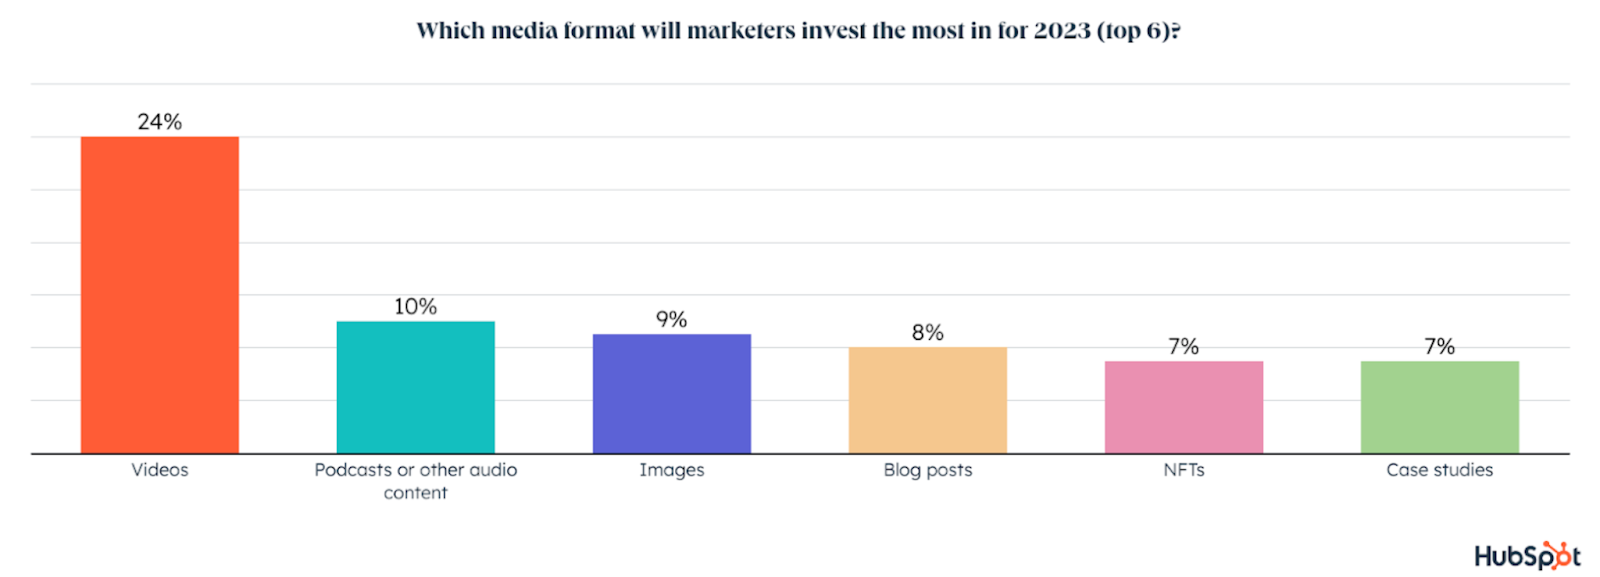 What media format will marketers invest the most in in 2023? Video: 24%, podcasts: 10%, images: 9%, blog posts: 8%, NFTs: 7%, case studies: 7%.